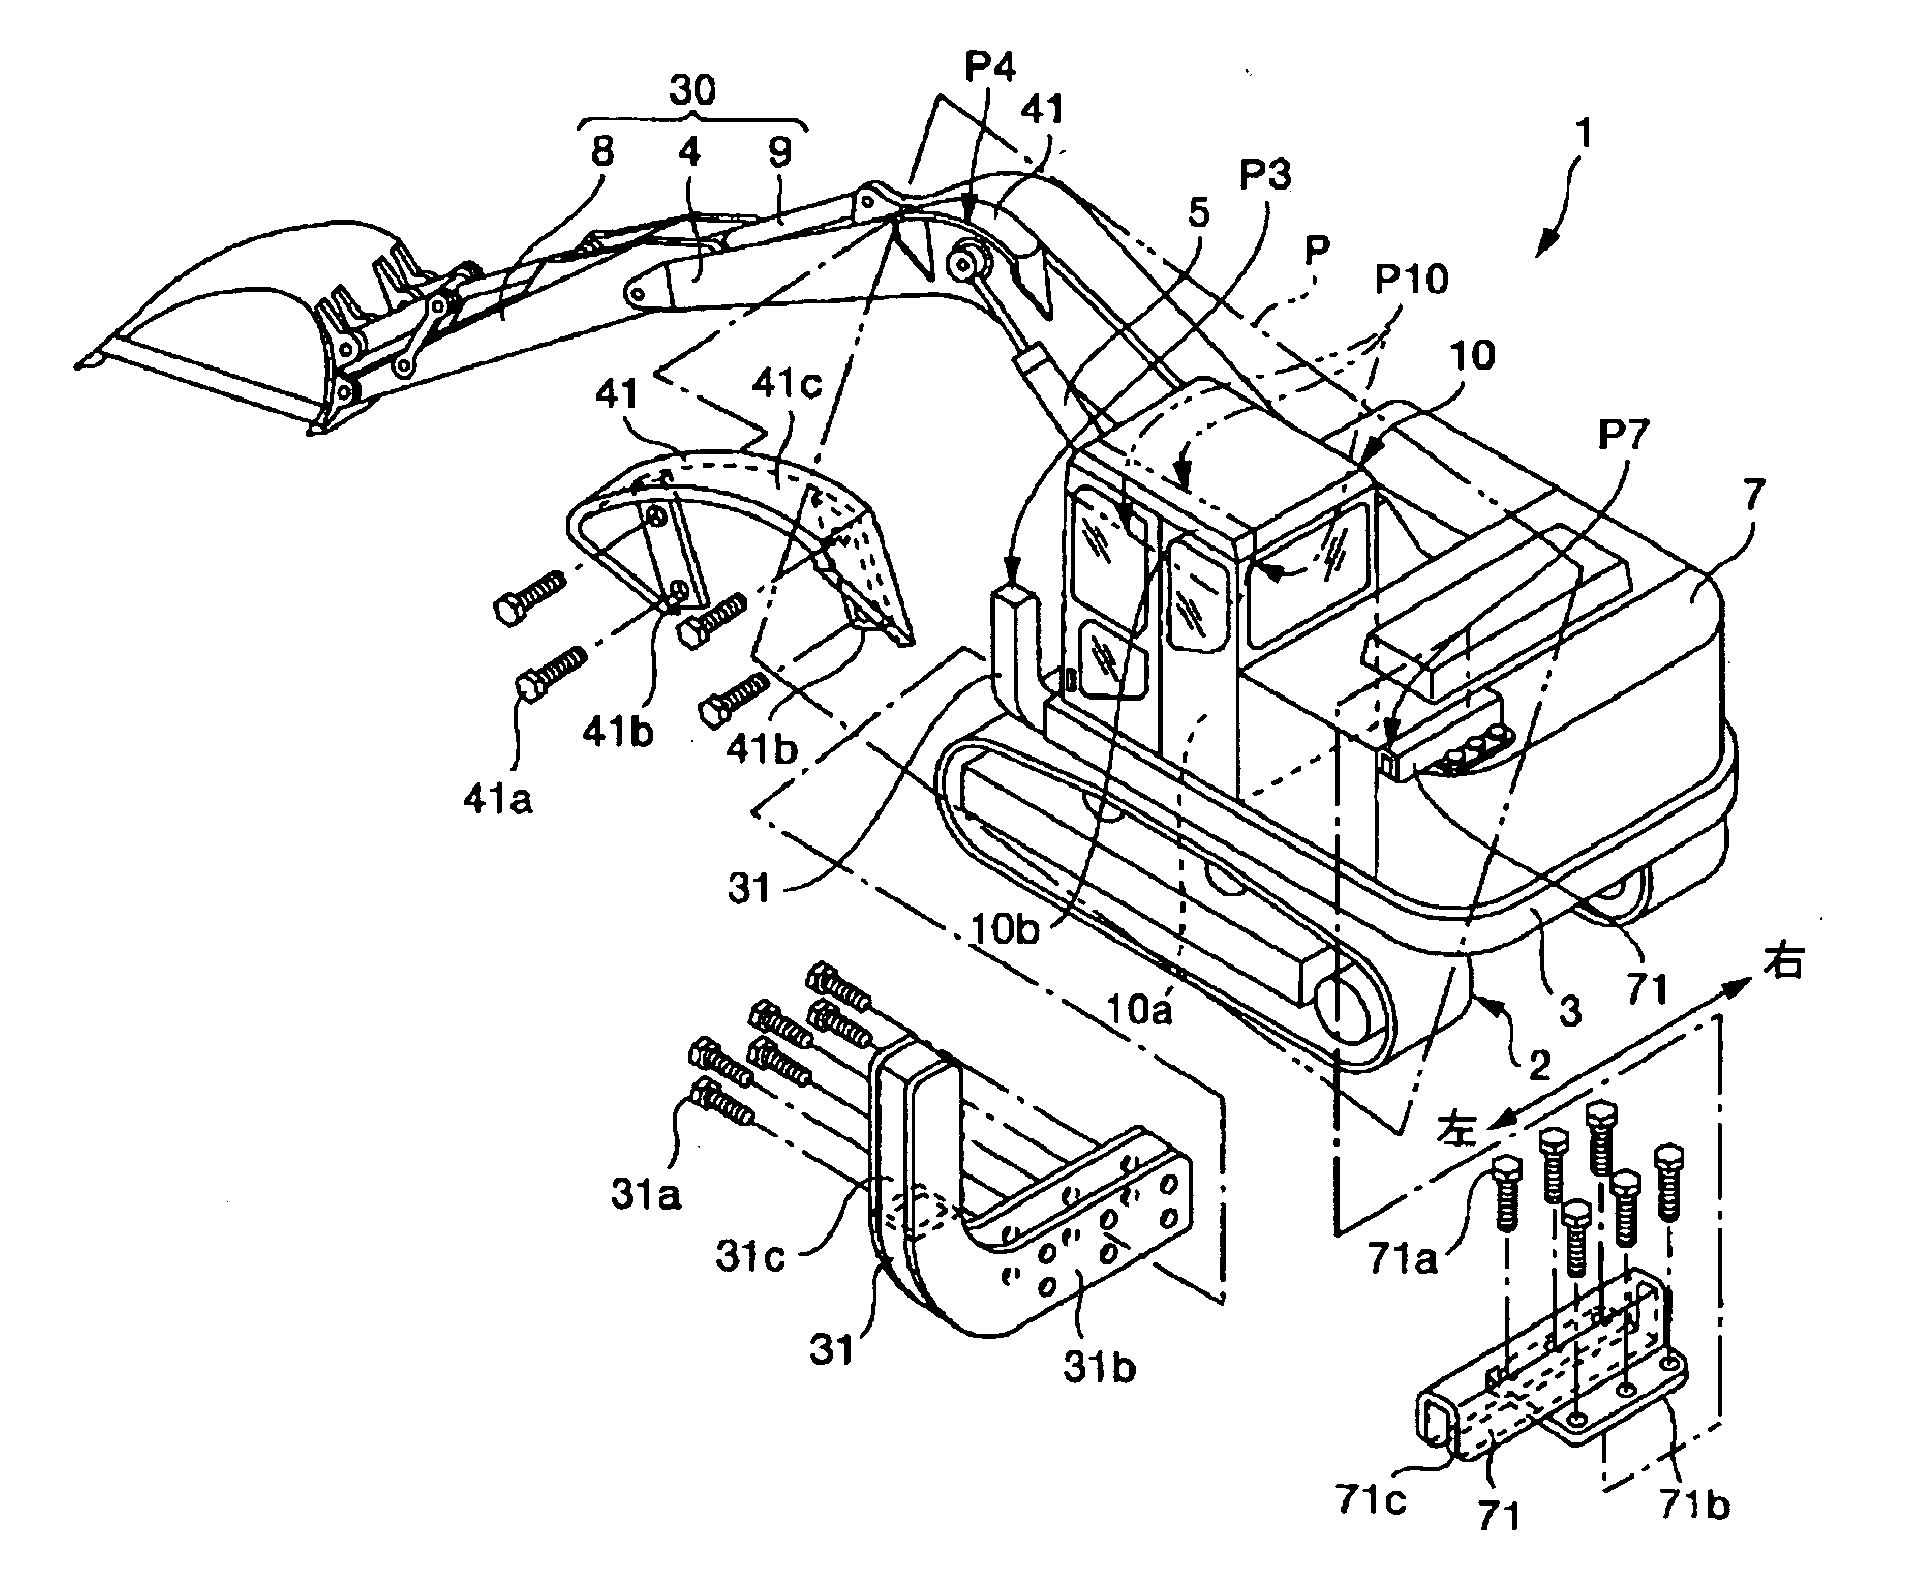 Construction machine and projecting object of the same